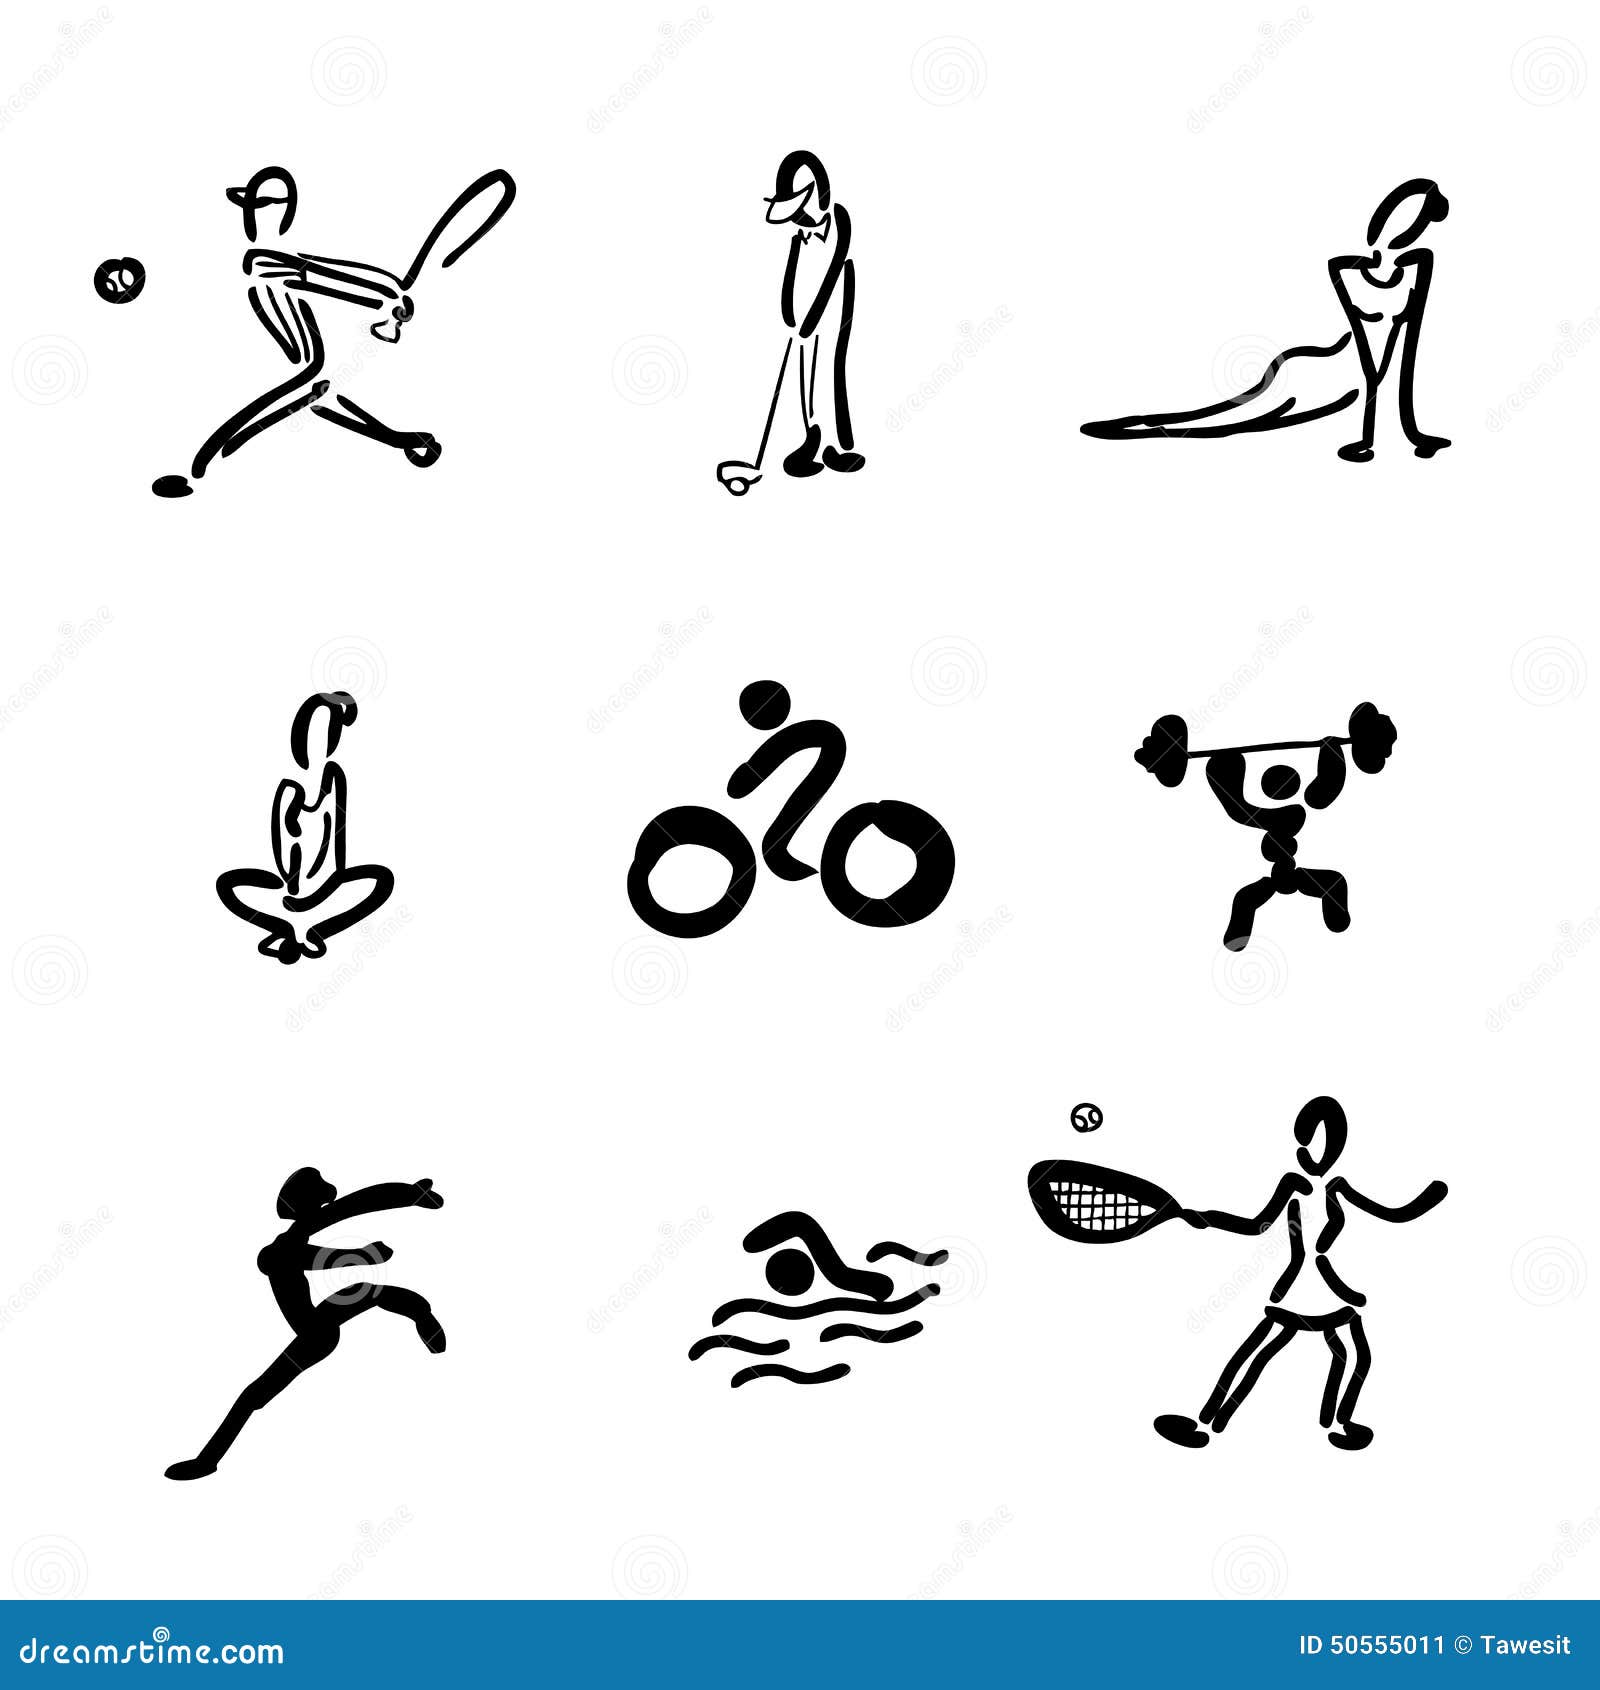 Sport drawing icons stock vector. Illustration of control - 50555011